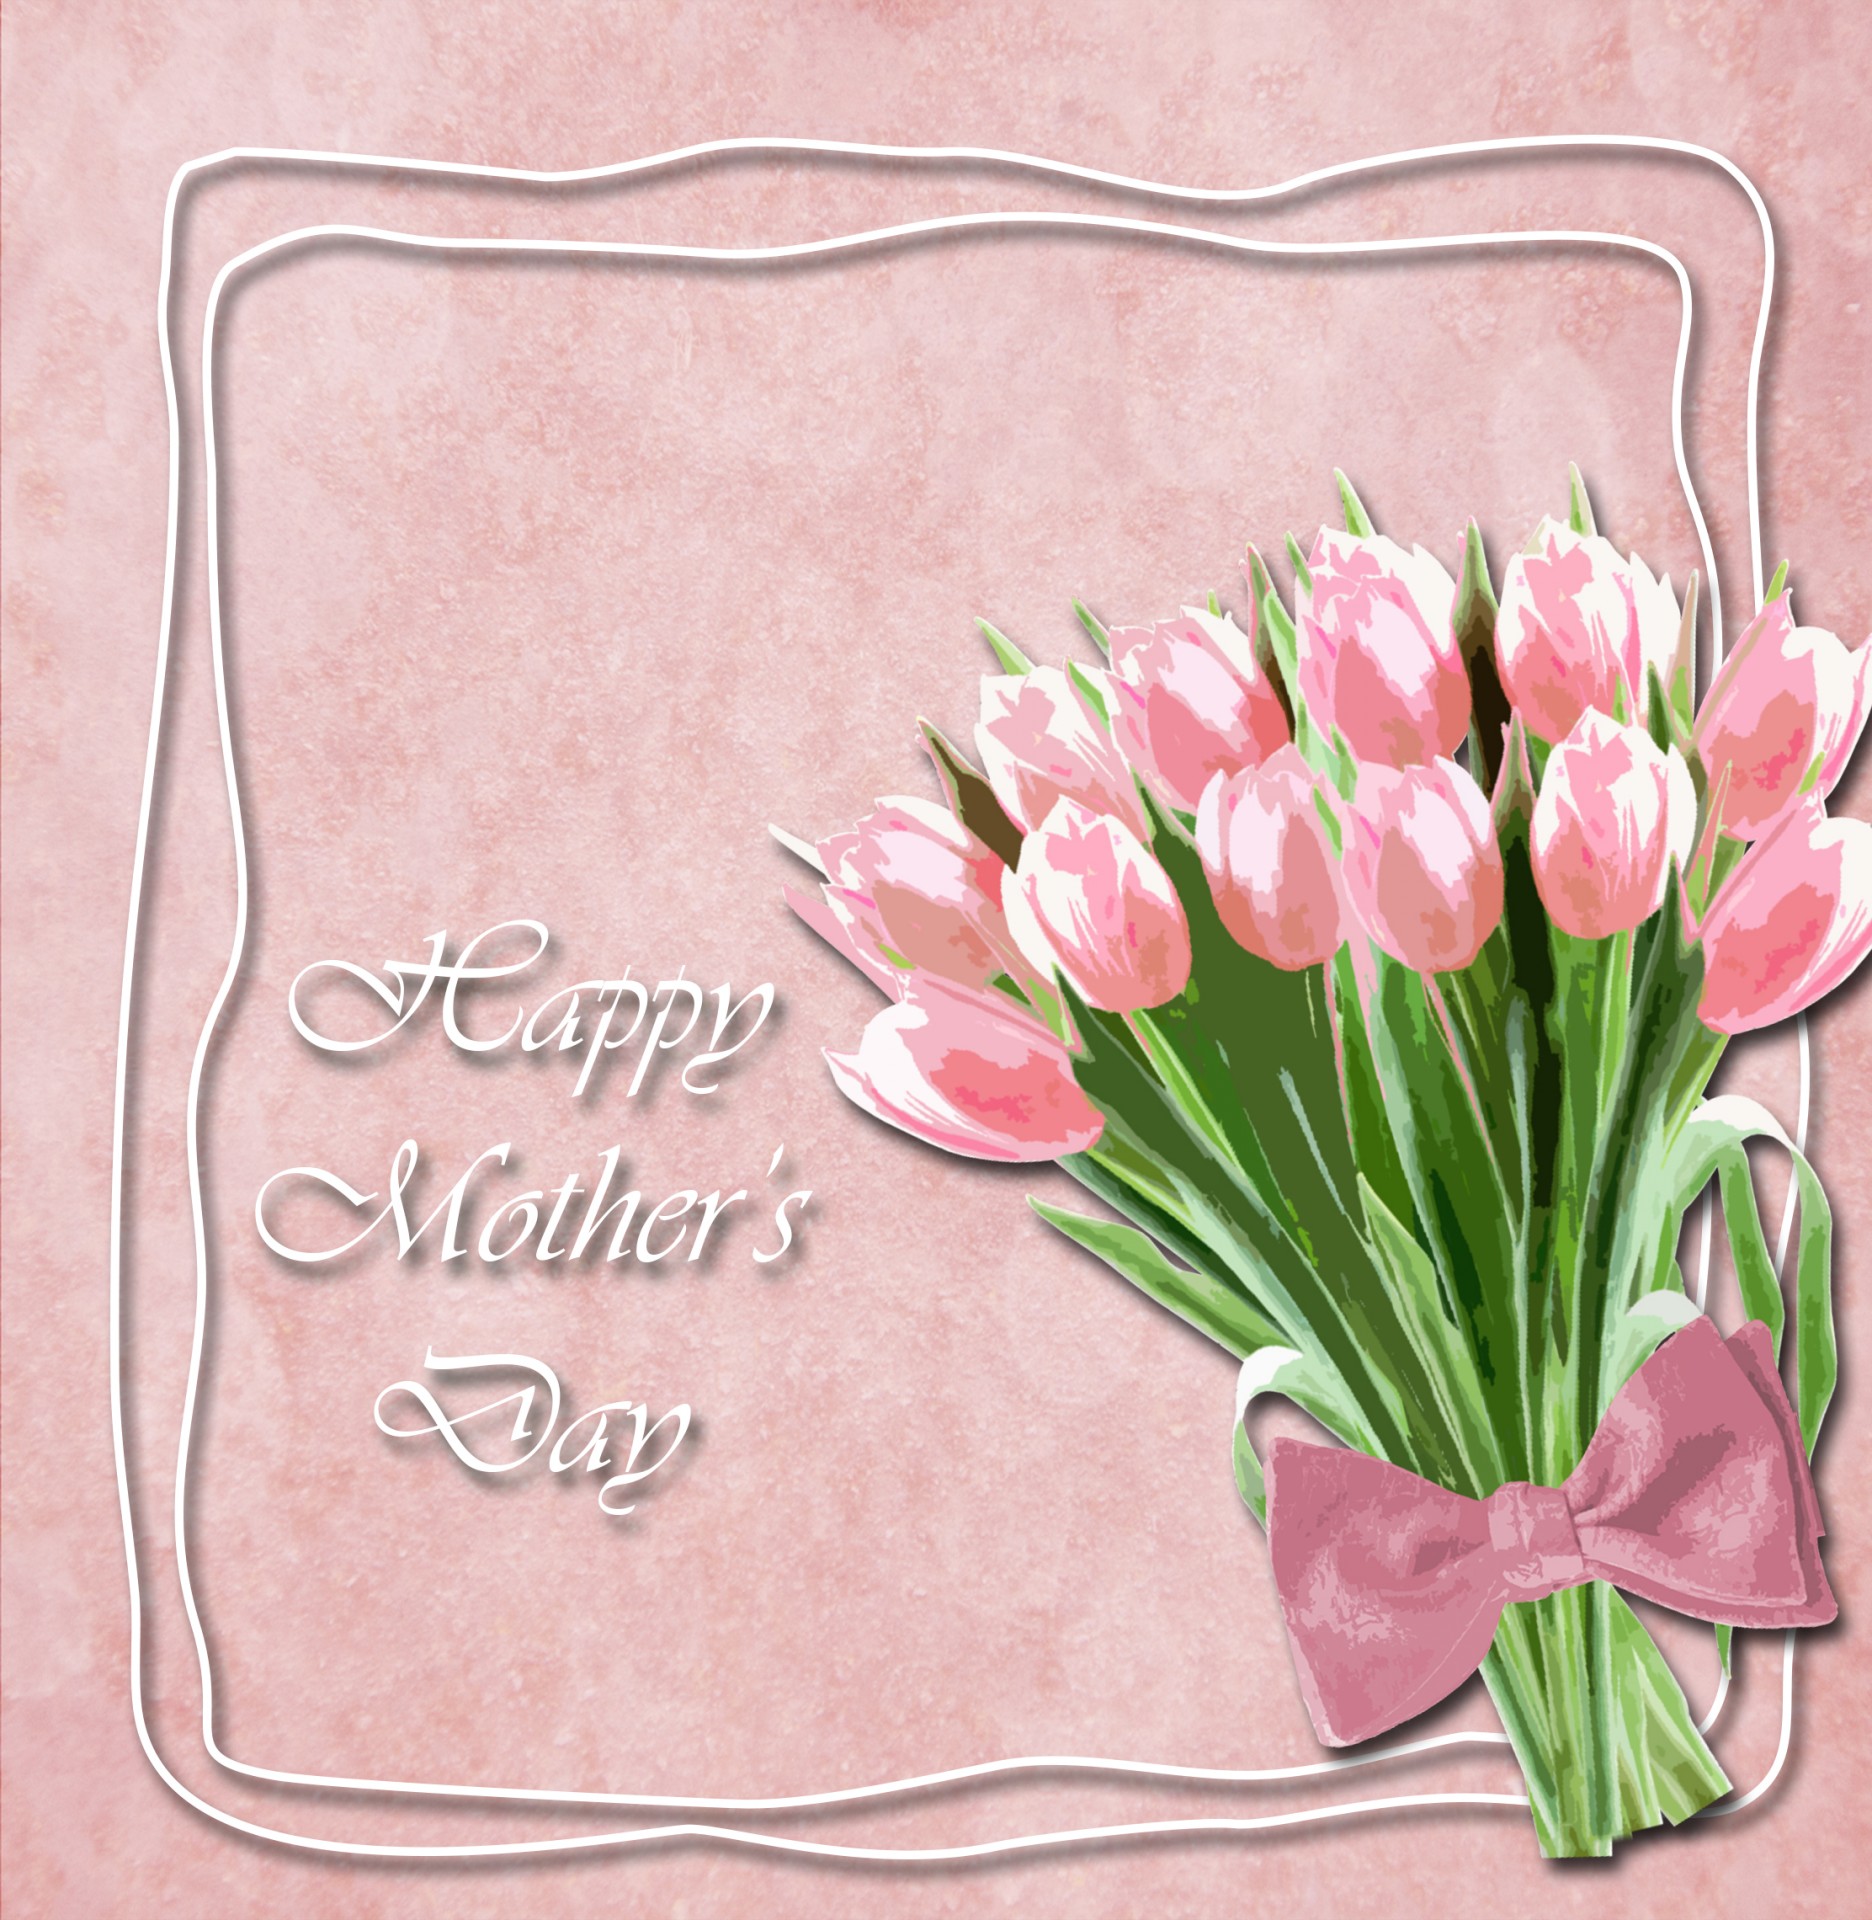 Albums 92 Wallpaper Happy Mothers Day Images With Flowers Updated 102023 